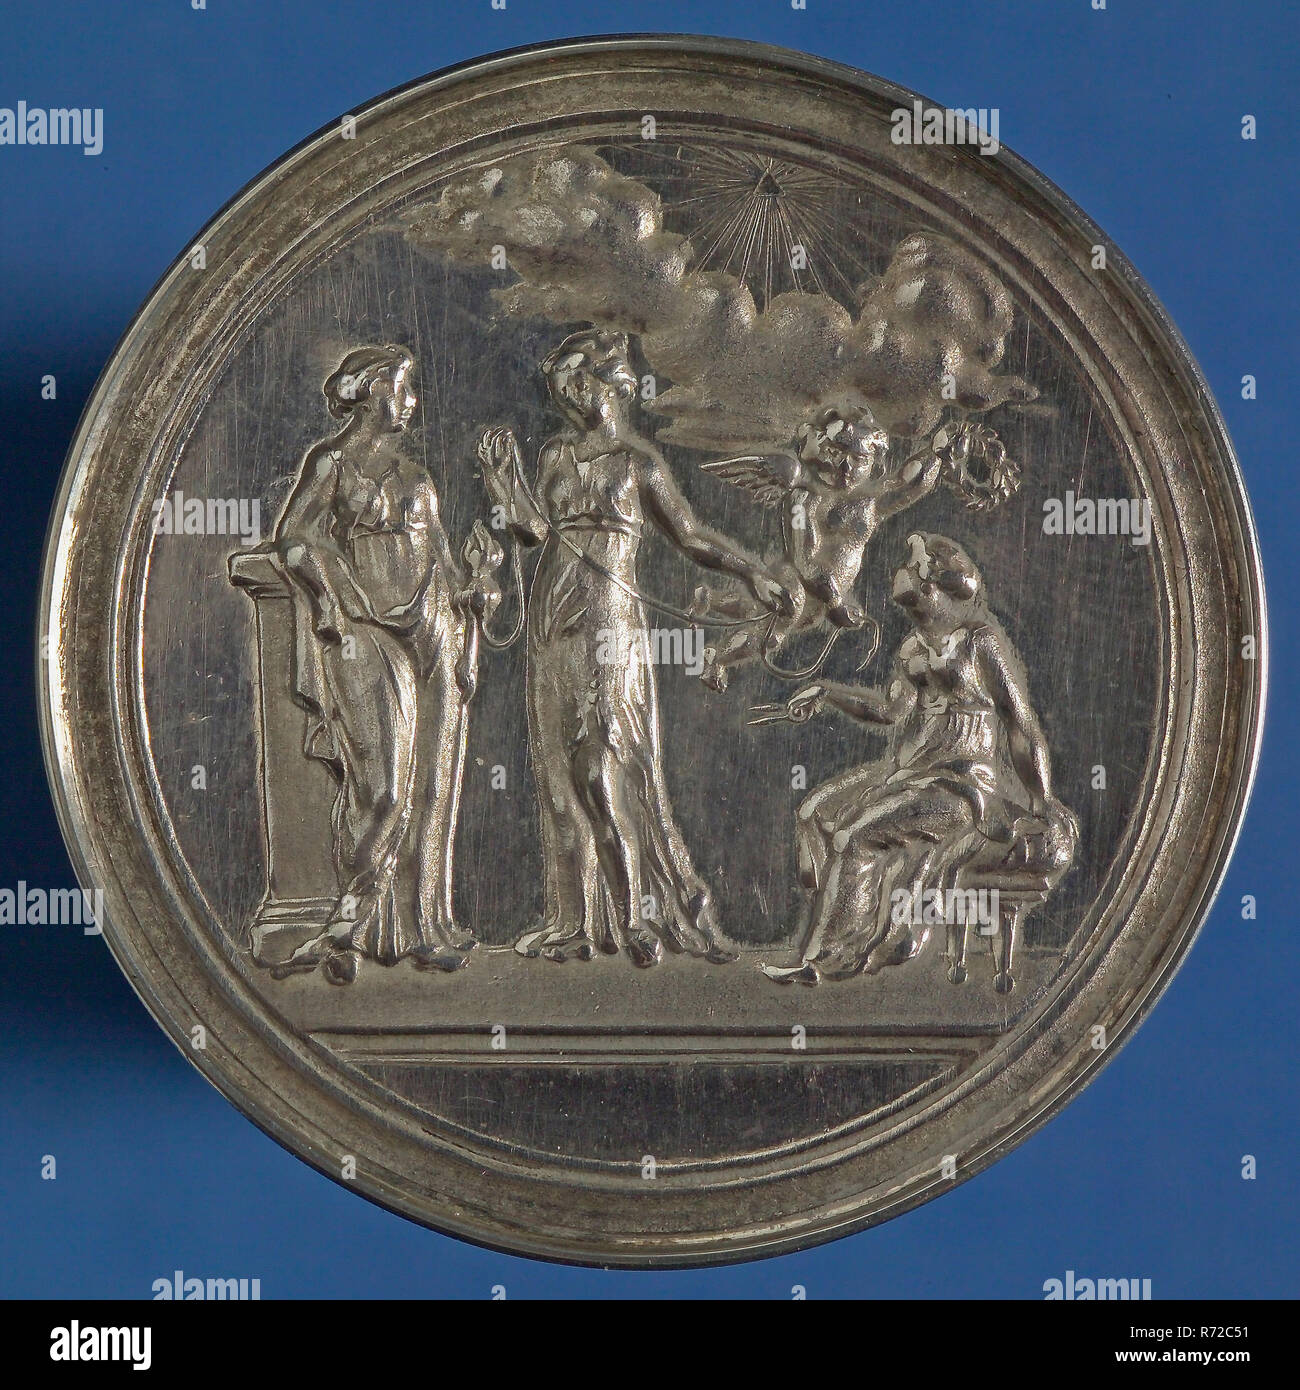 Medal, issued by Maatschappij tot reddening drownings in Rotterdam, 1809, presented to Wouter Hoogendam, 1827, screw medal penning image silver h 0.5, (penny) Medal in bordeaux-red box with gold decoration, no Rotterdam rescue rescue drowning Stock Photo